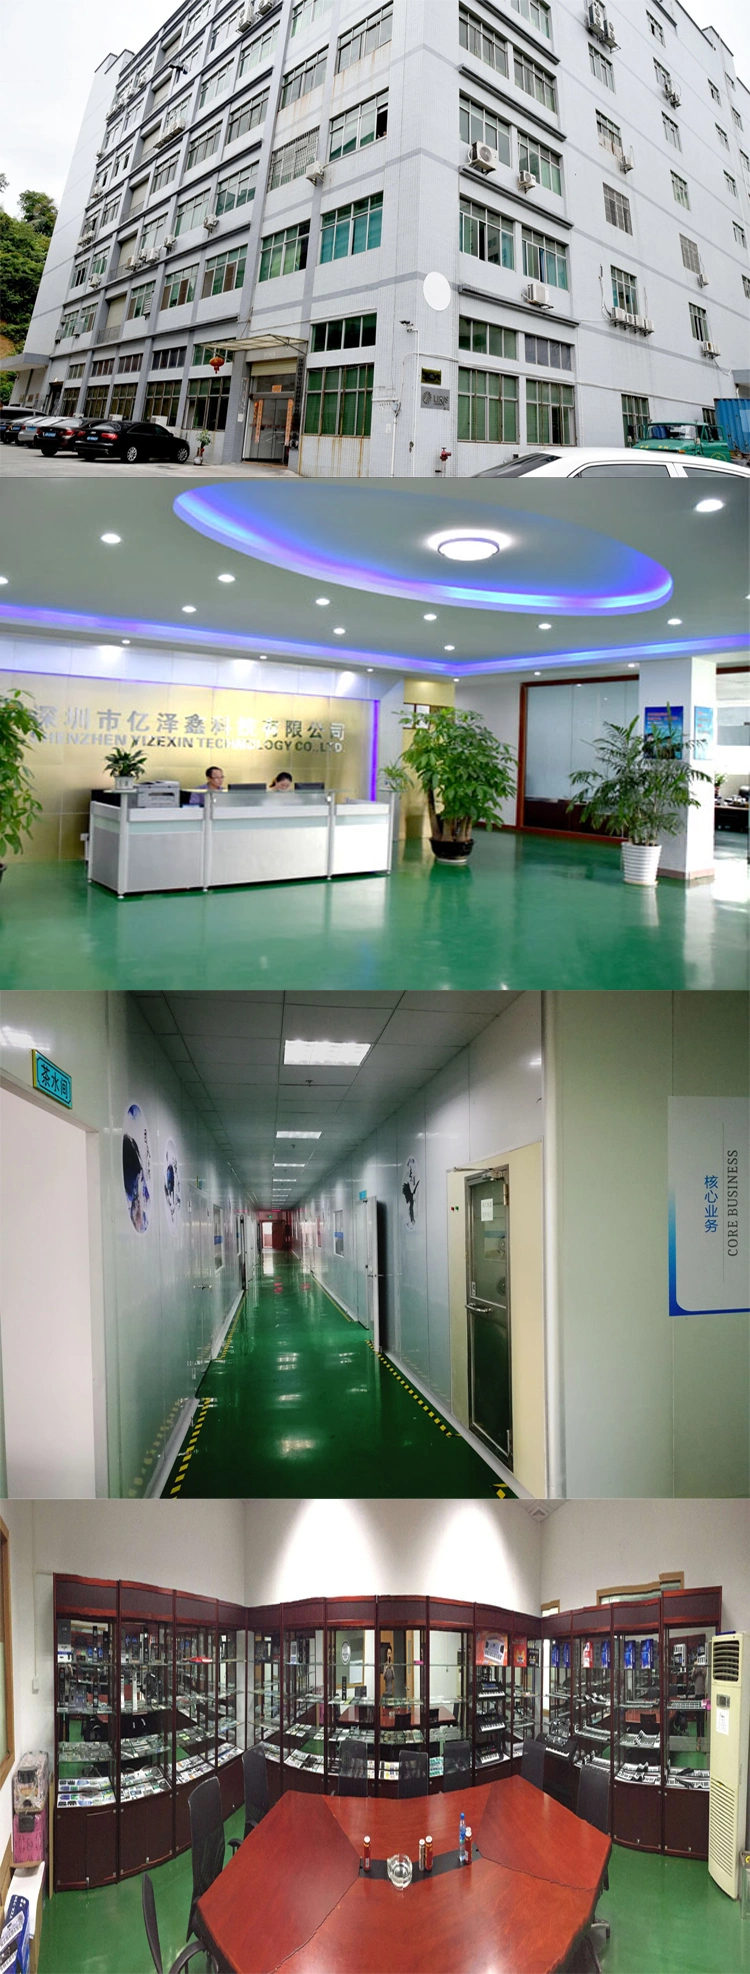 Flexible Printed Circuit Board Manufacturer in China